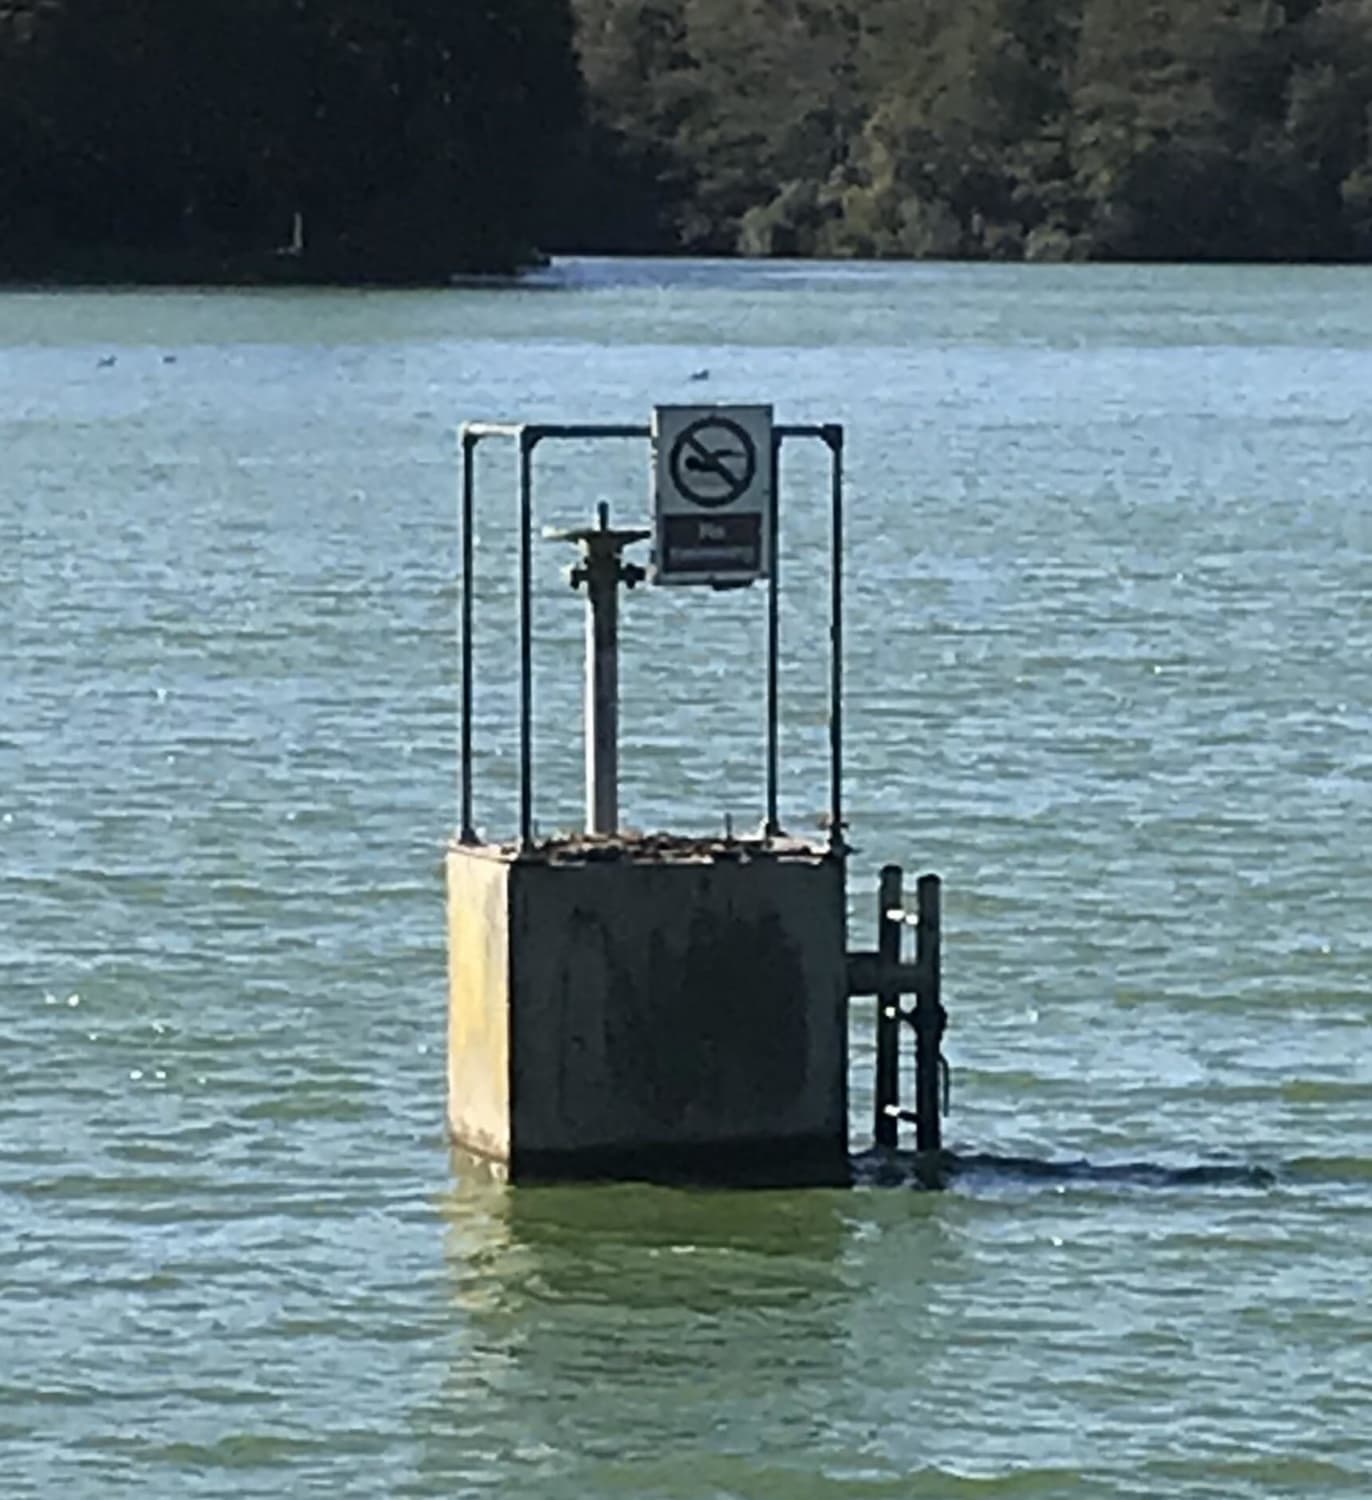 This valve in the middle of a lake with a no swimming sign